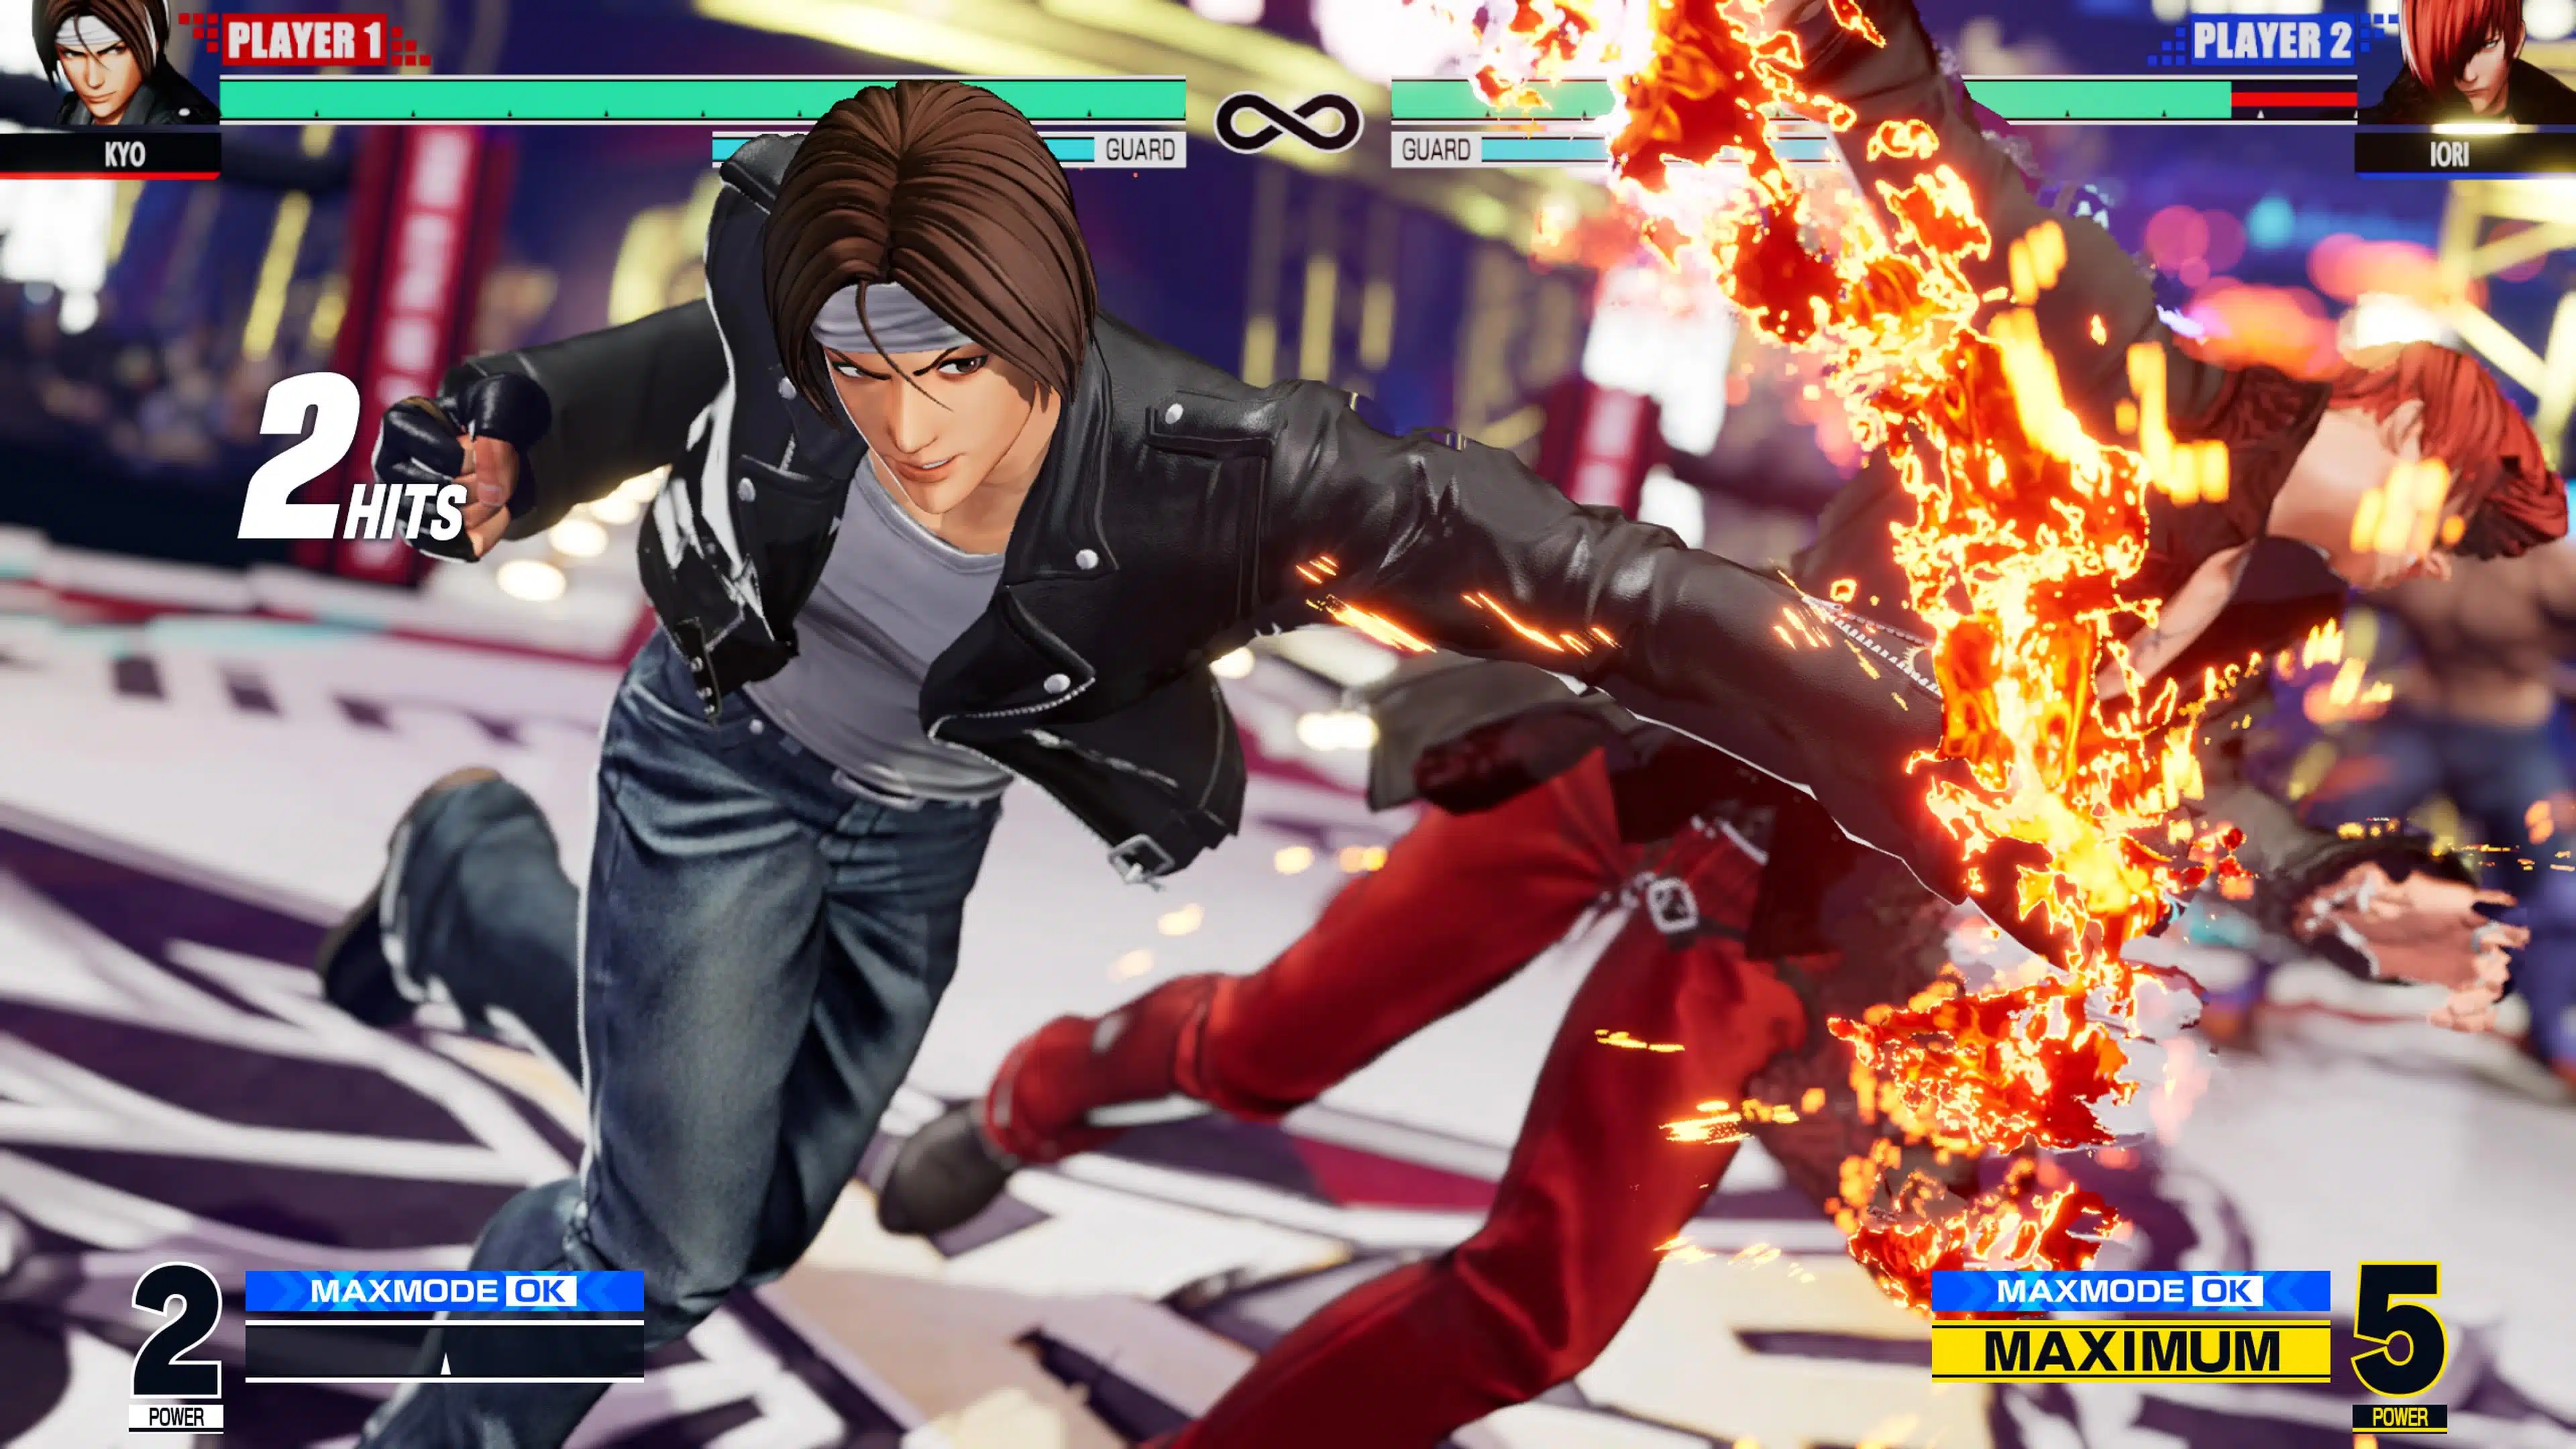 King of Fighters 15 Update 2.10